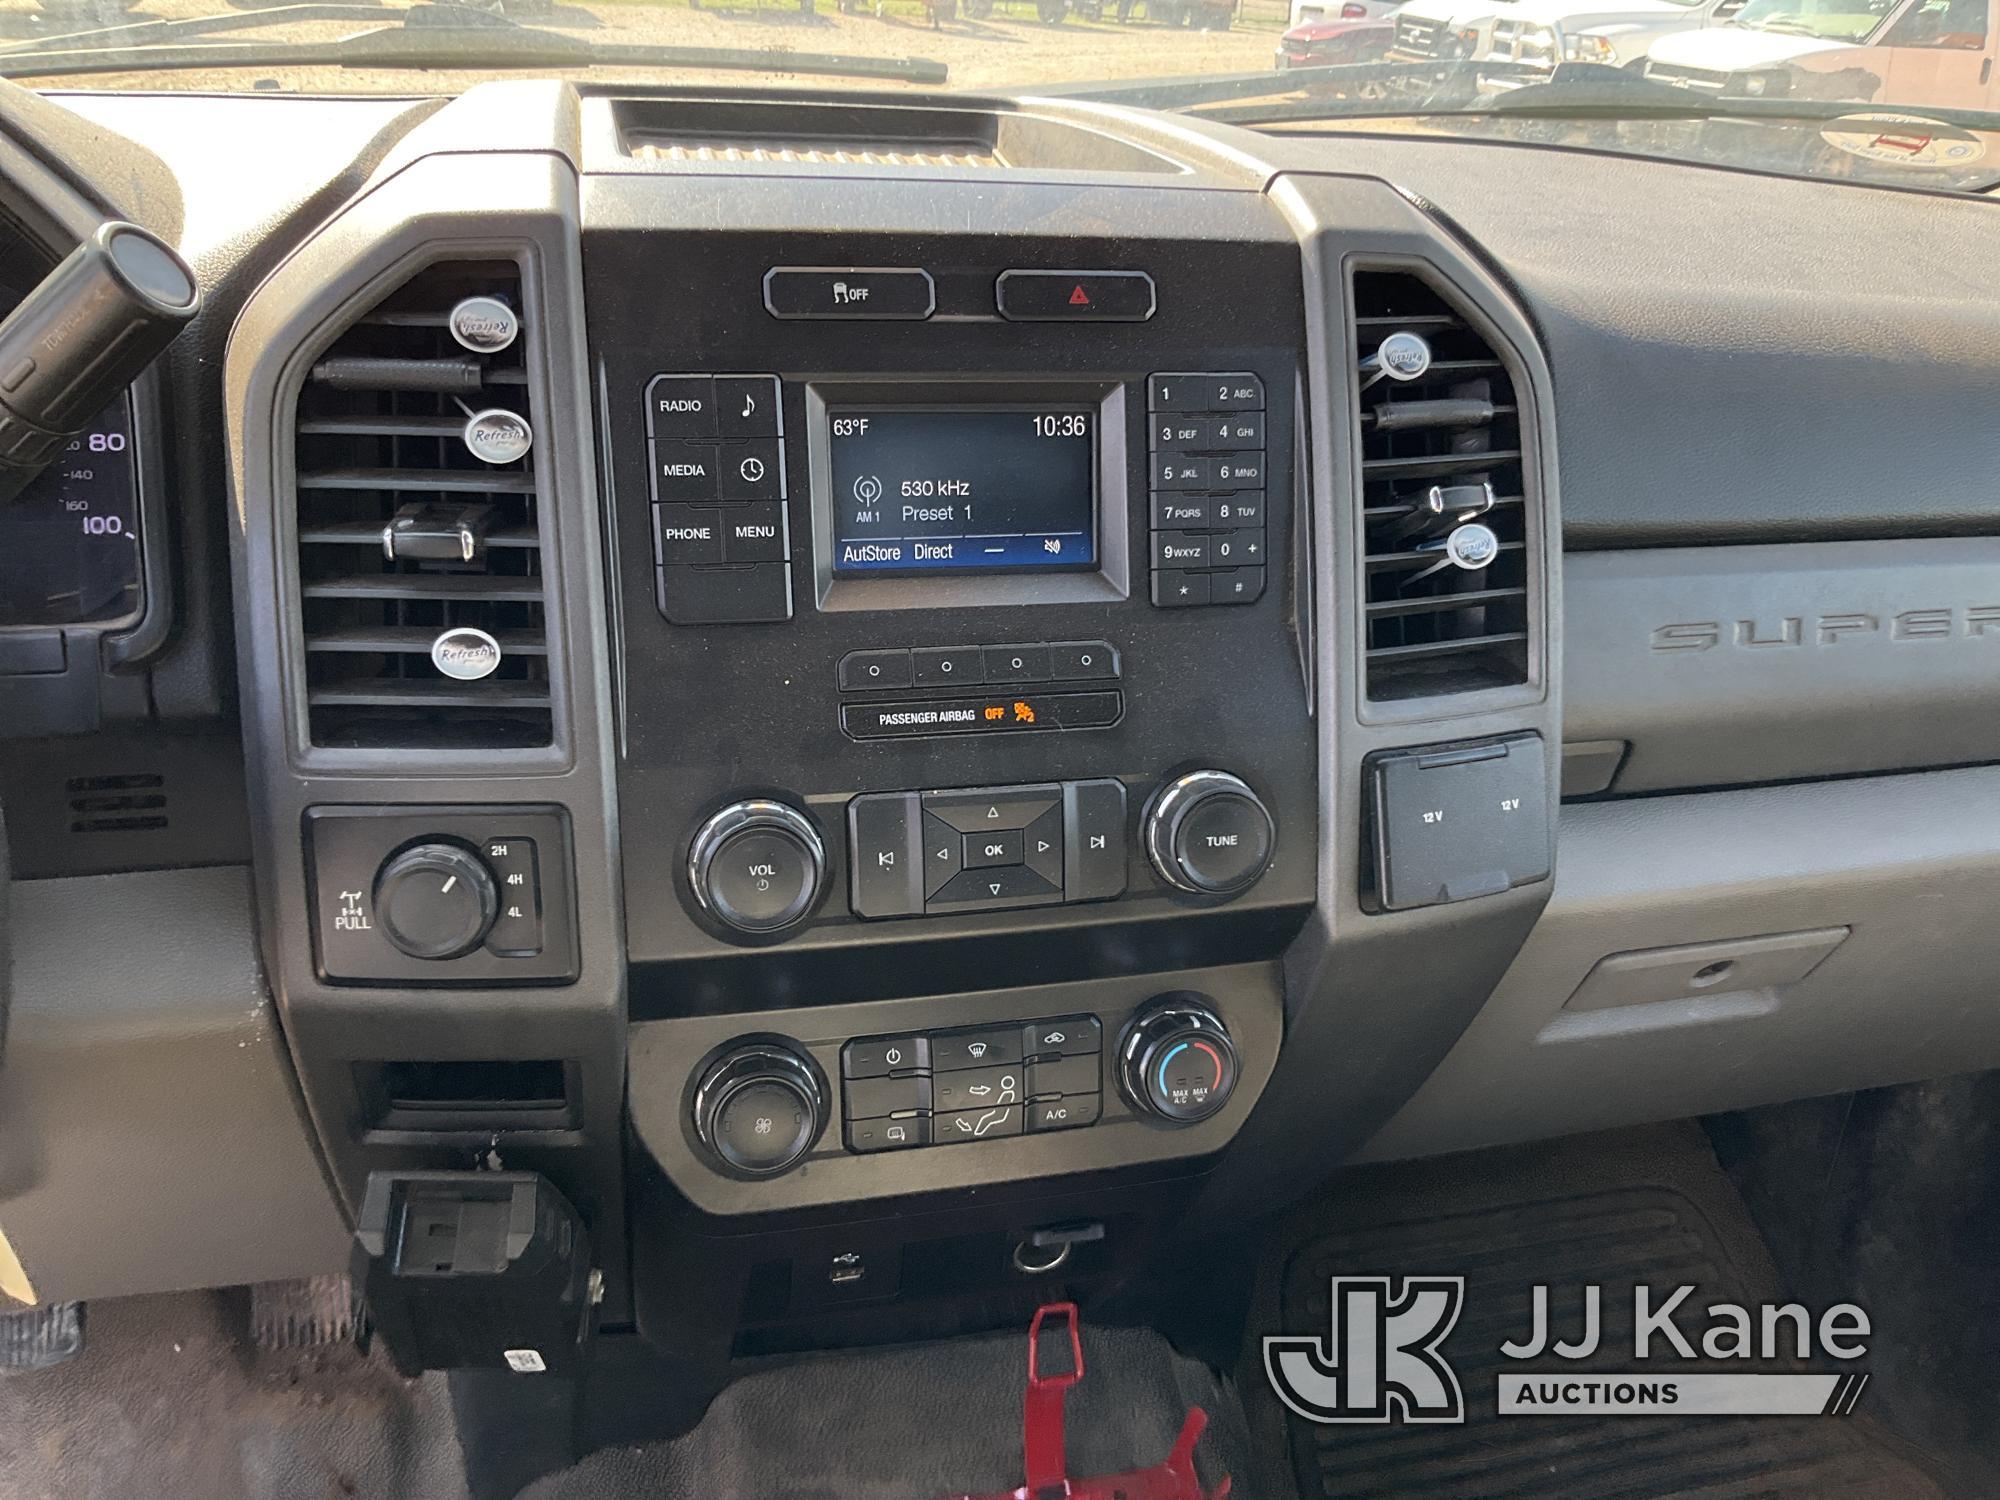 (Waxahachie, TX) 2019 Ford F250 4x4 Extended-Cab Pickup Truck Runs & Moves) (Body Damage, Cracked Wi